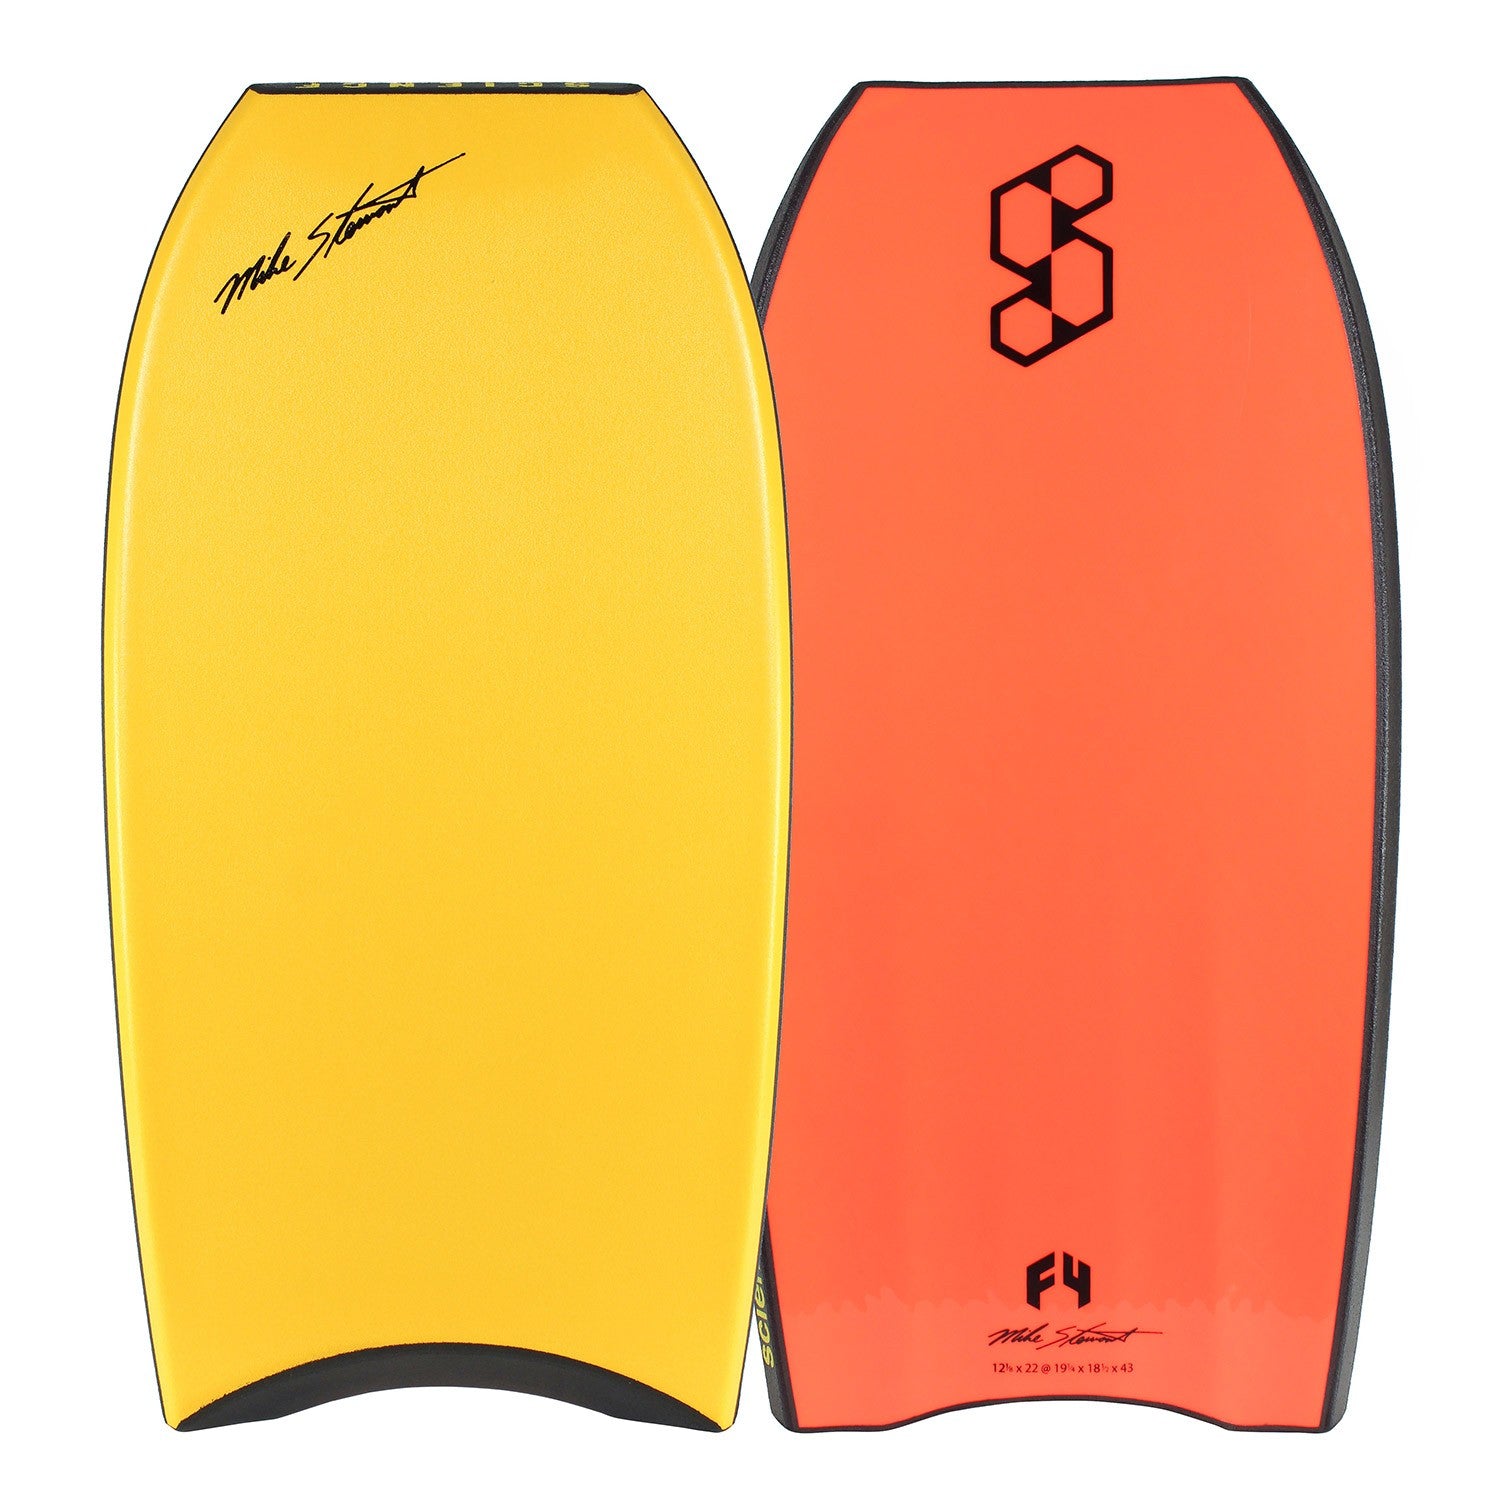 Science Bodyboard - Style Loaded F4 Quad Vent PP - Tangerine / Fluoro Red